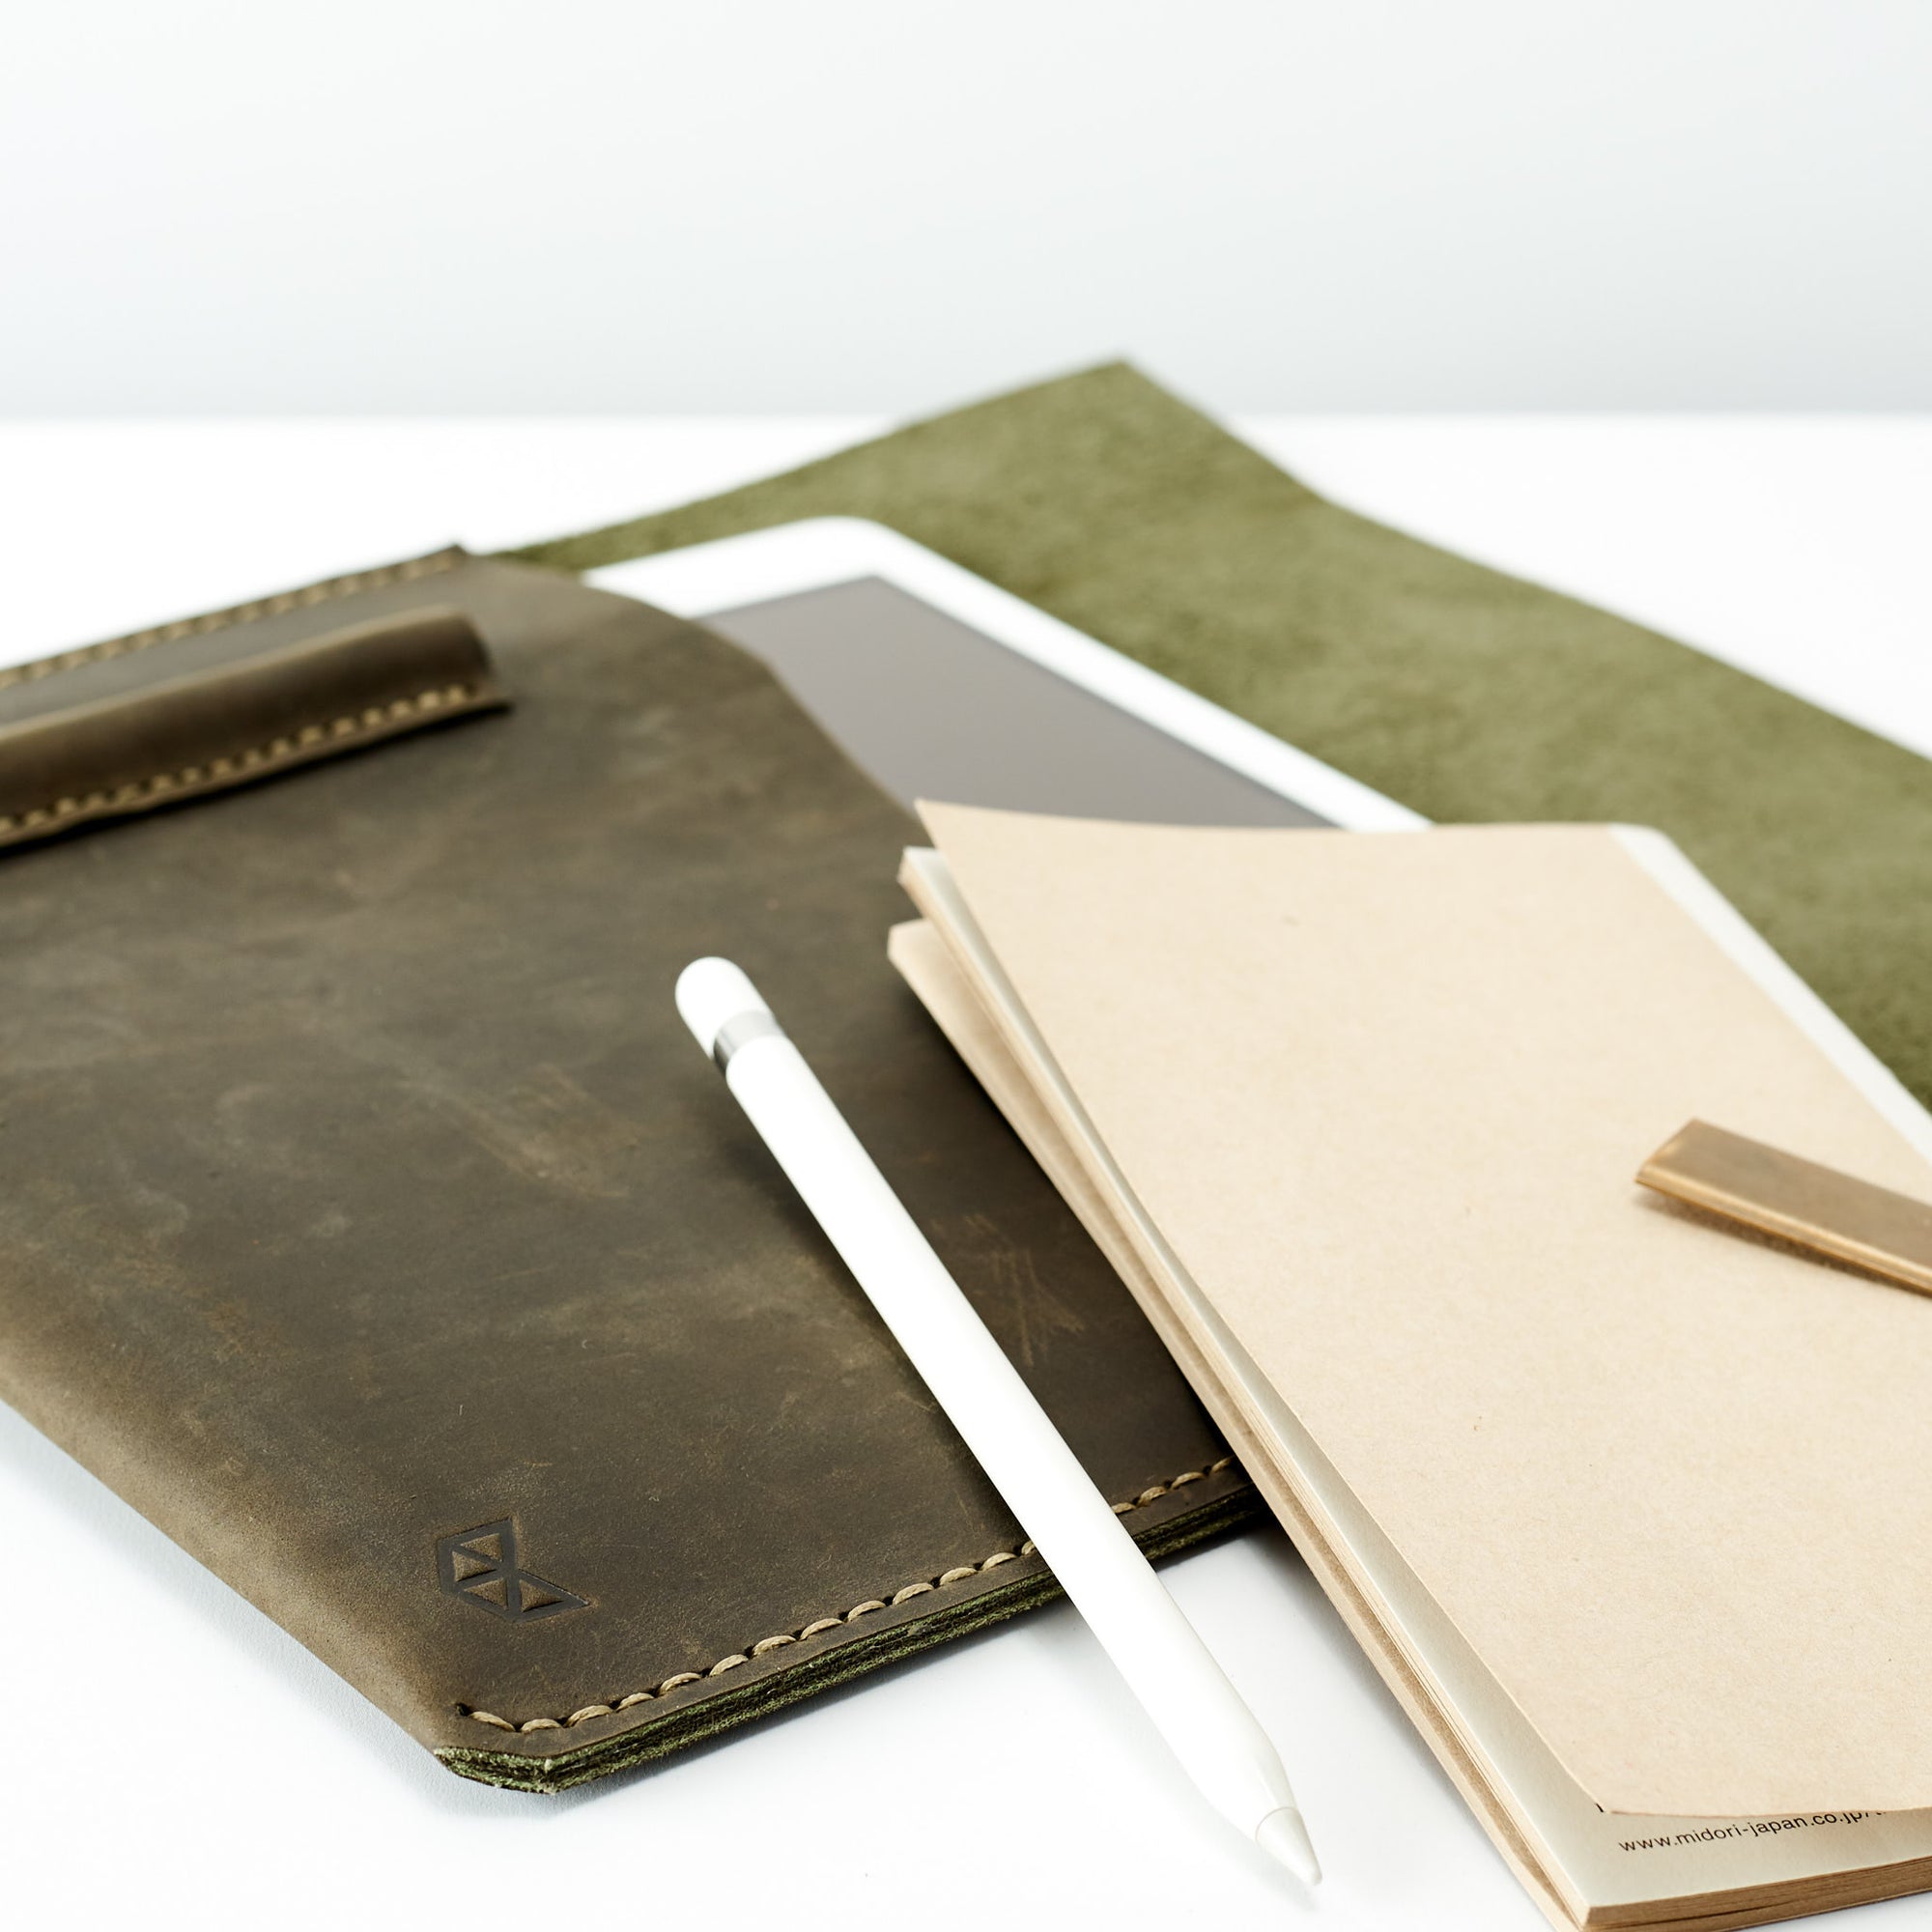 Apple. iPad Sleeve. iPad Leather Case Green With Apple Pencil Holder by Capra Leather